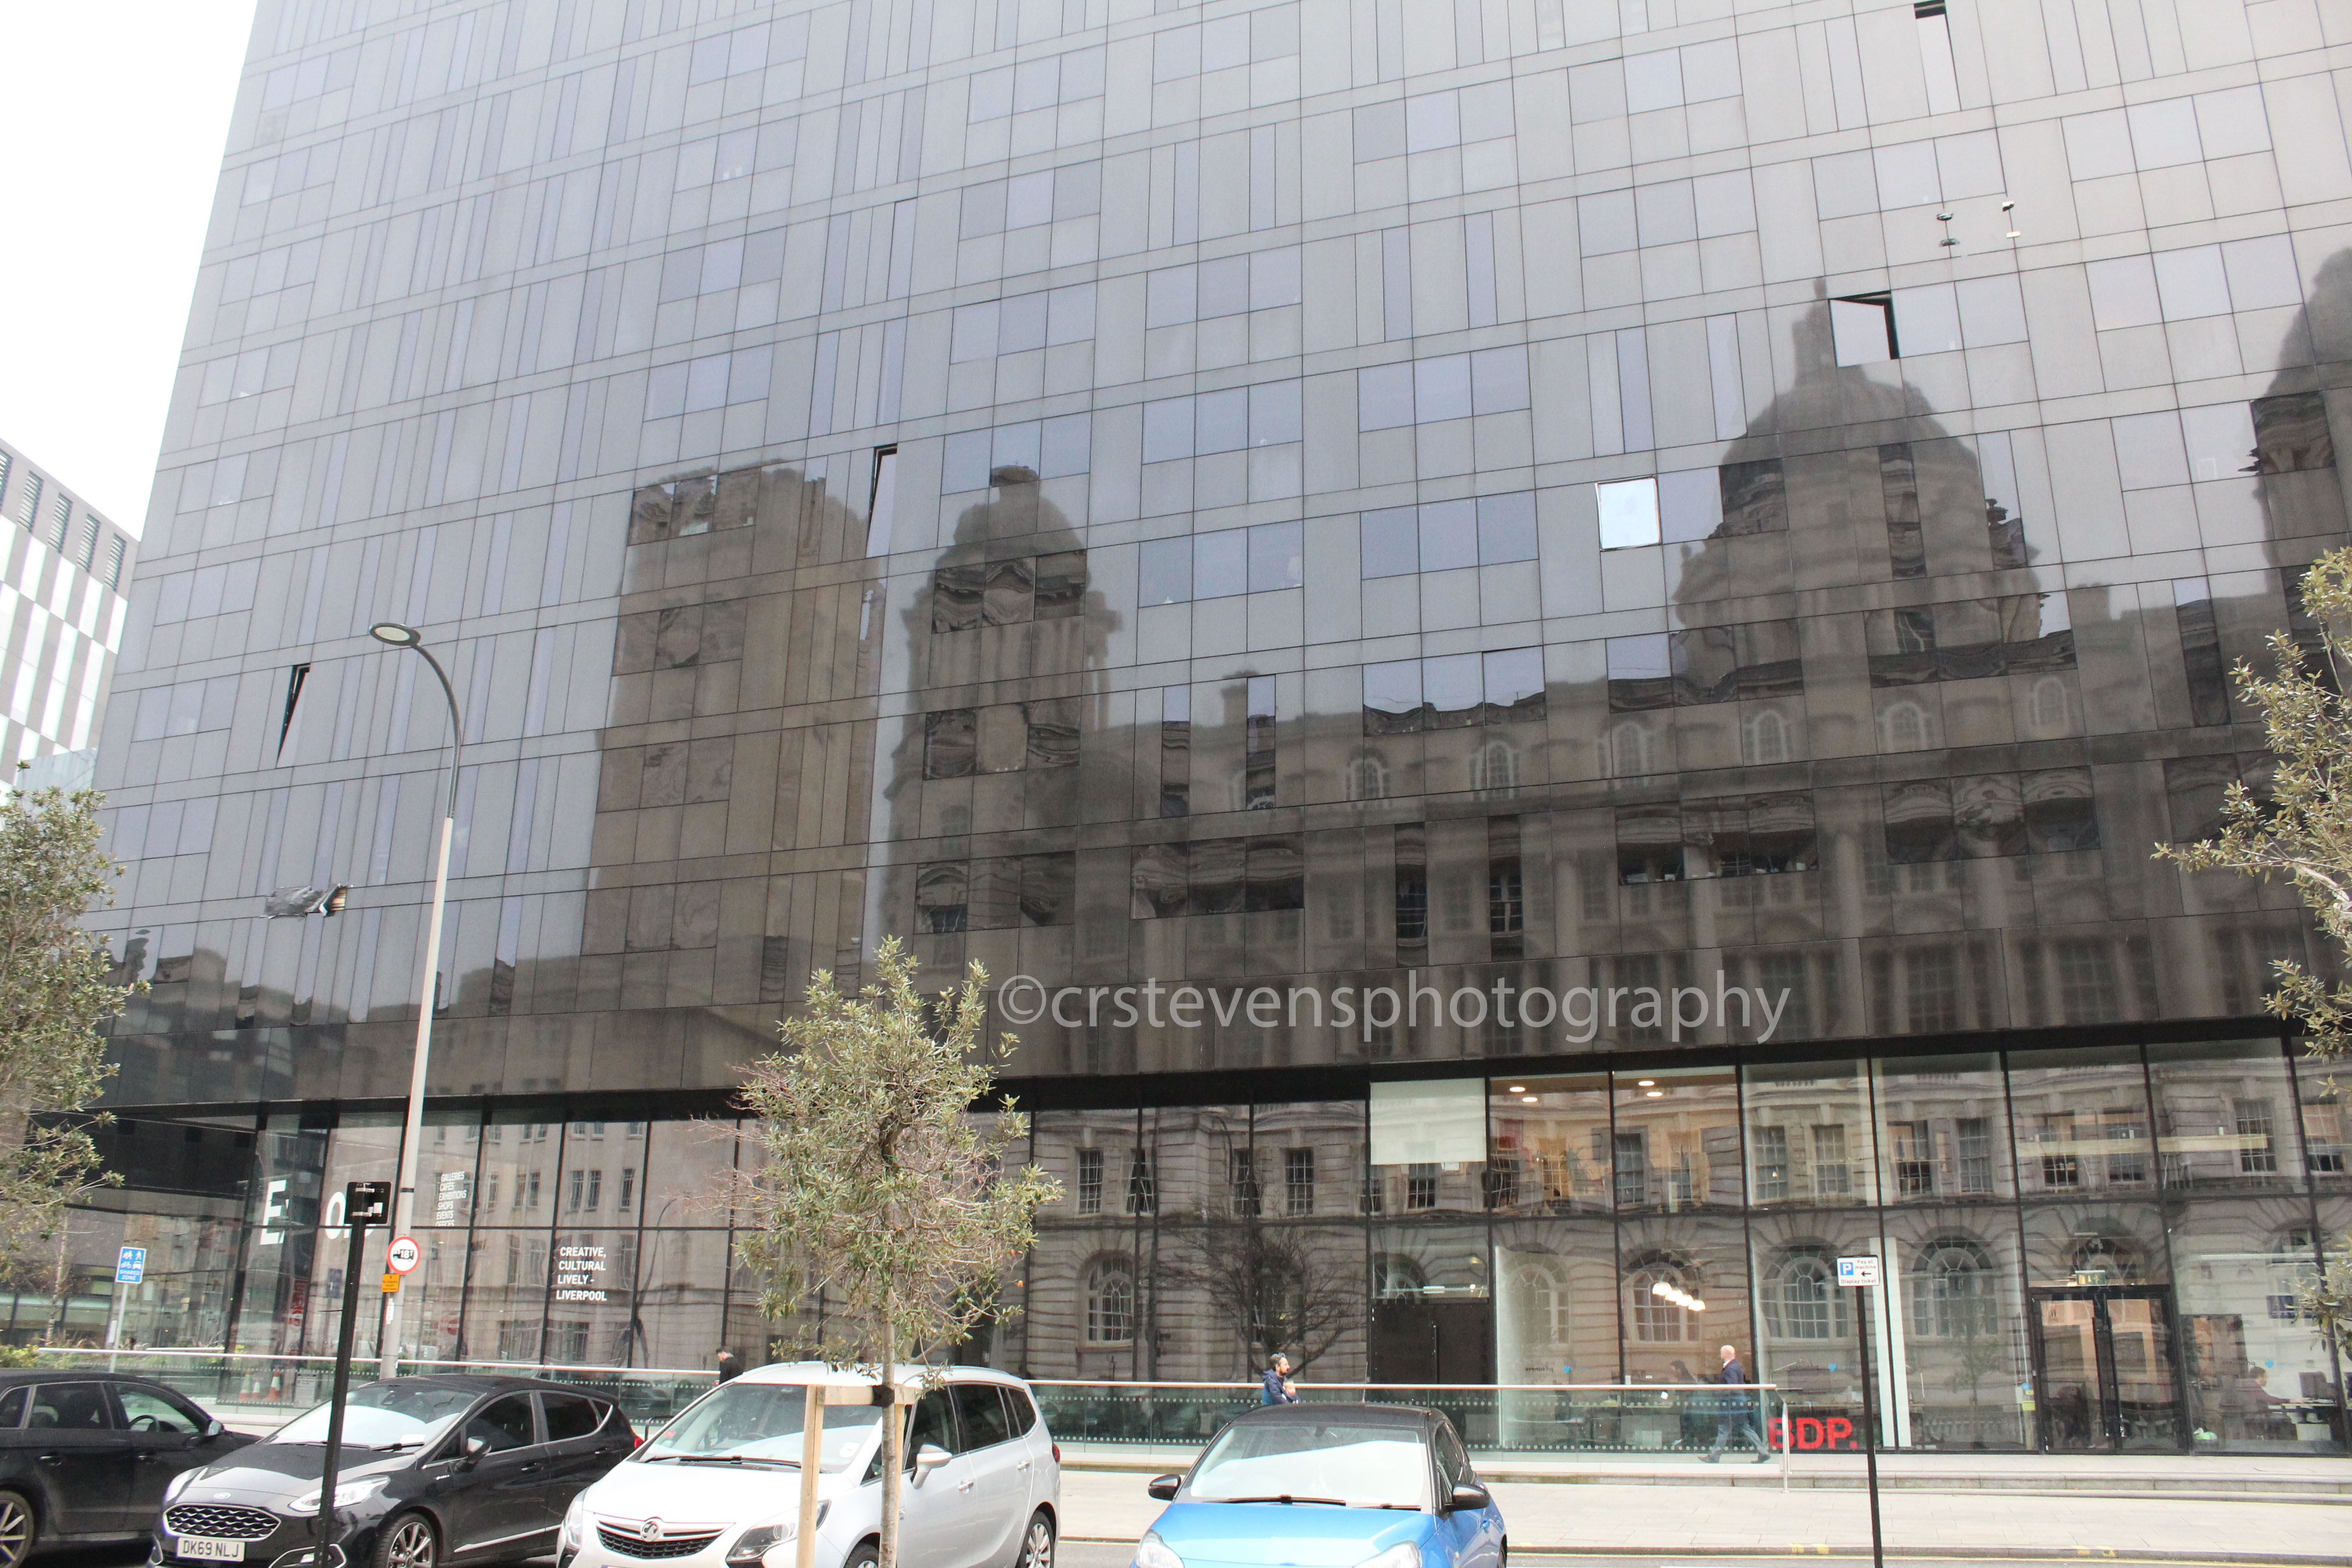 an old building reflected in the glass walls of a modern building